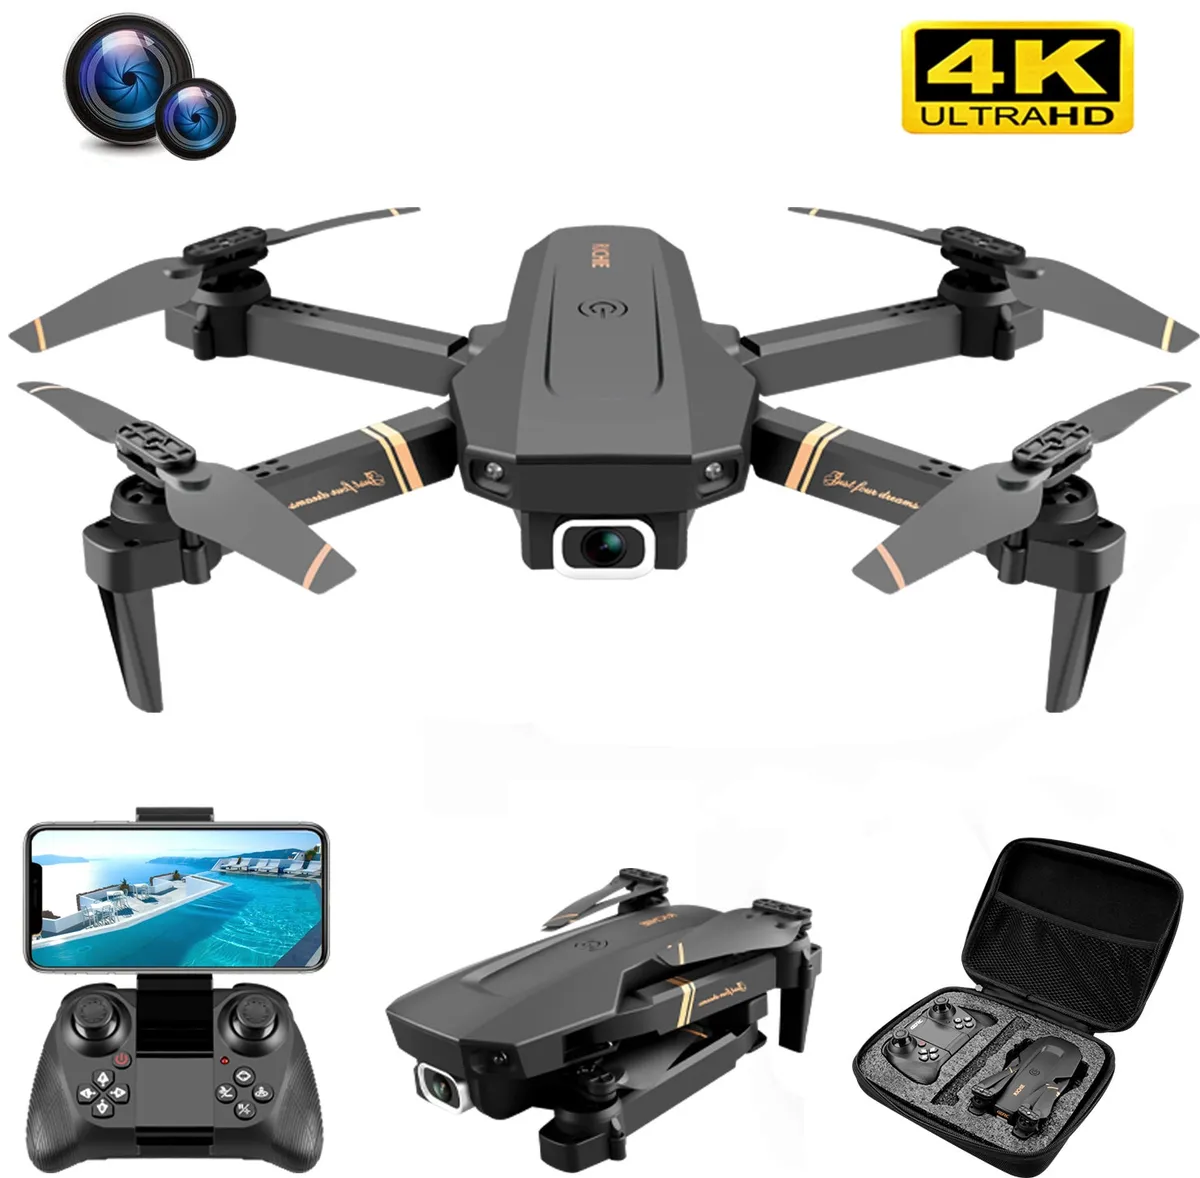  RC Drone 4K 1080P HD Wide Angle Camera WiFi Dual Camera Foldable Quadcopter Real Time Transmission Drone